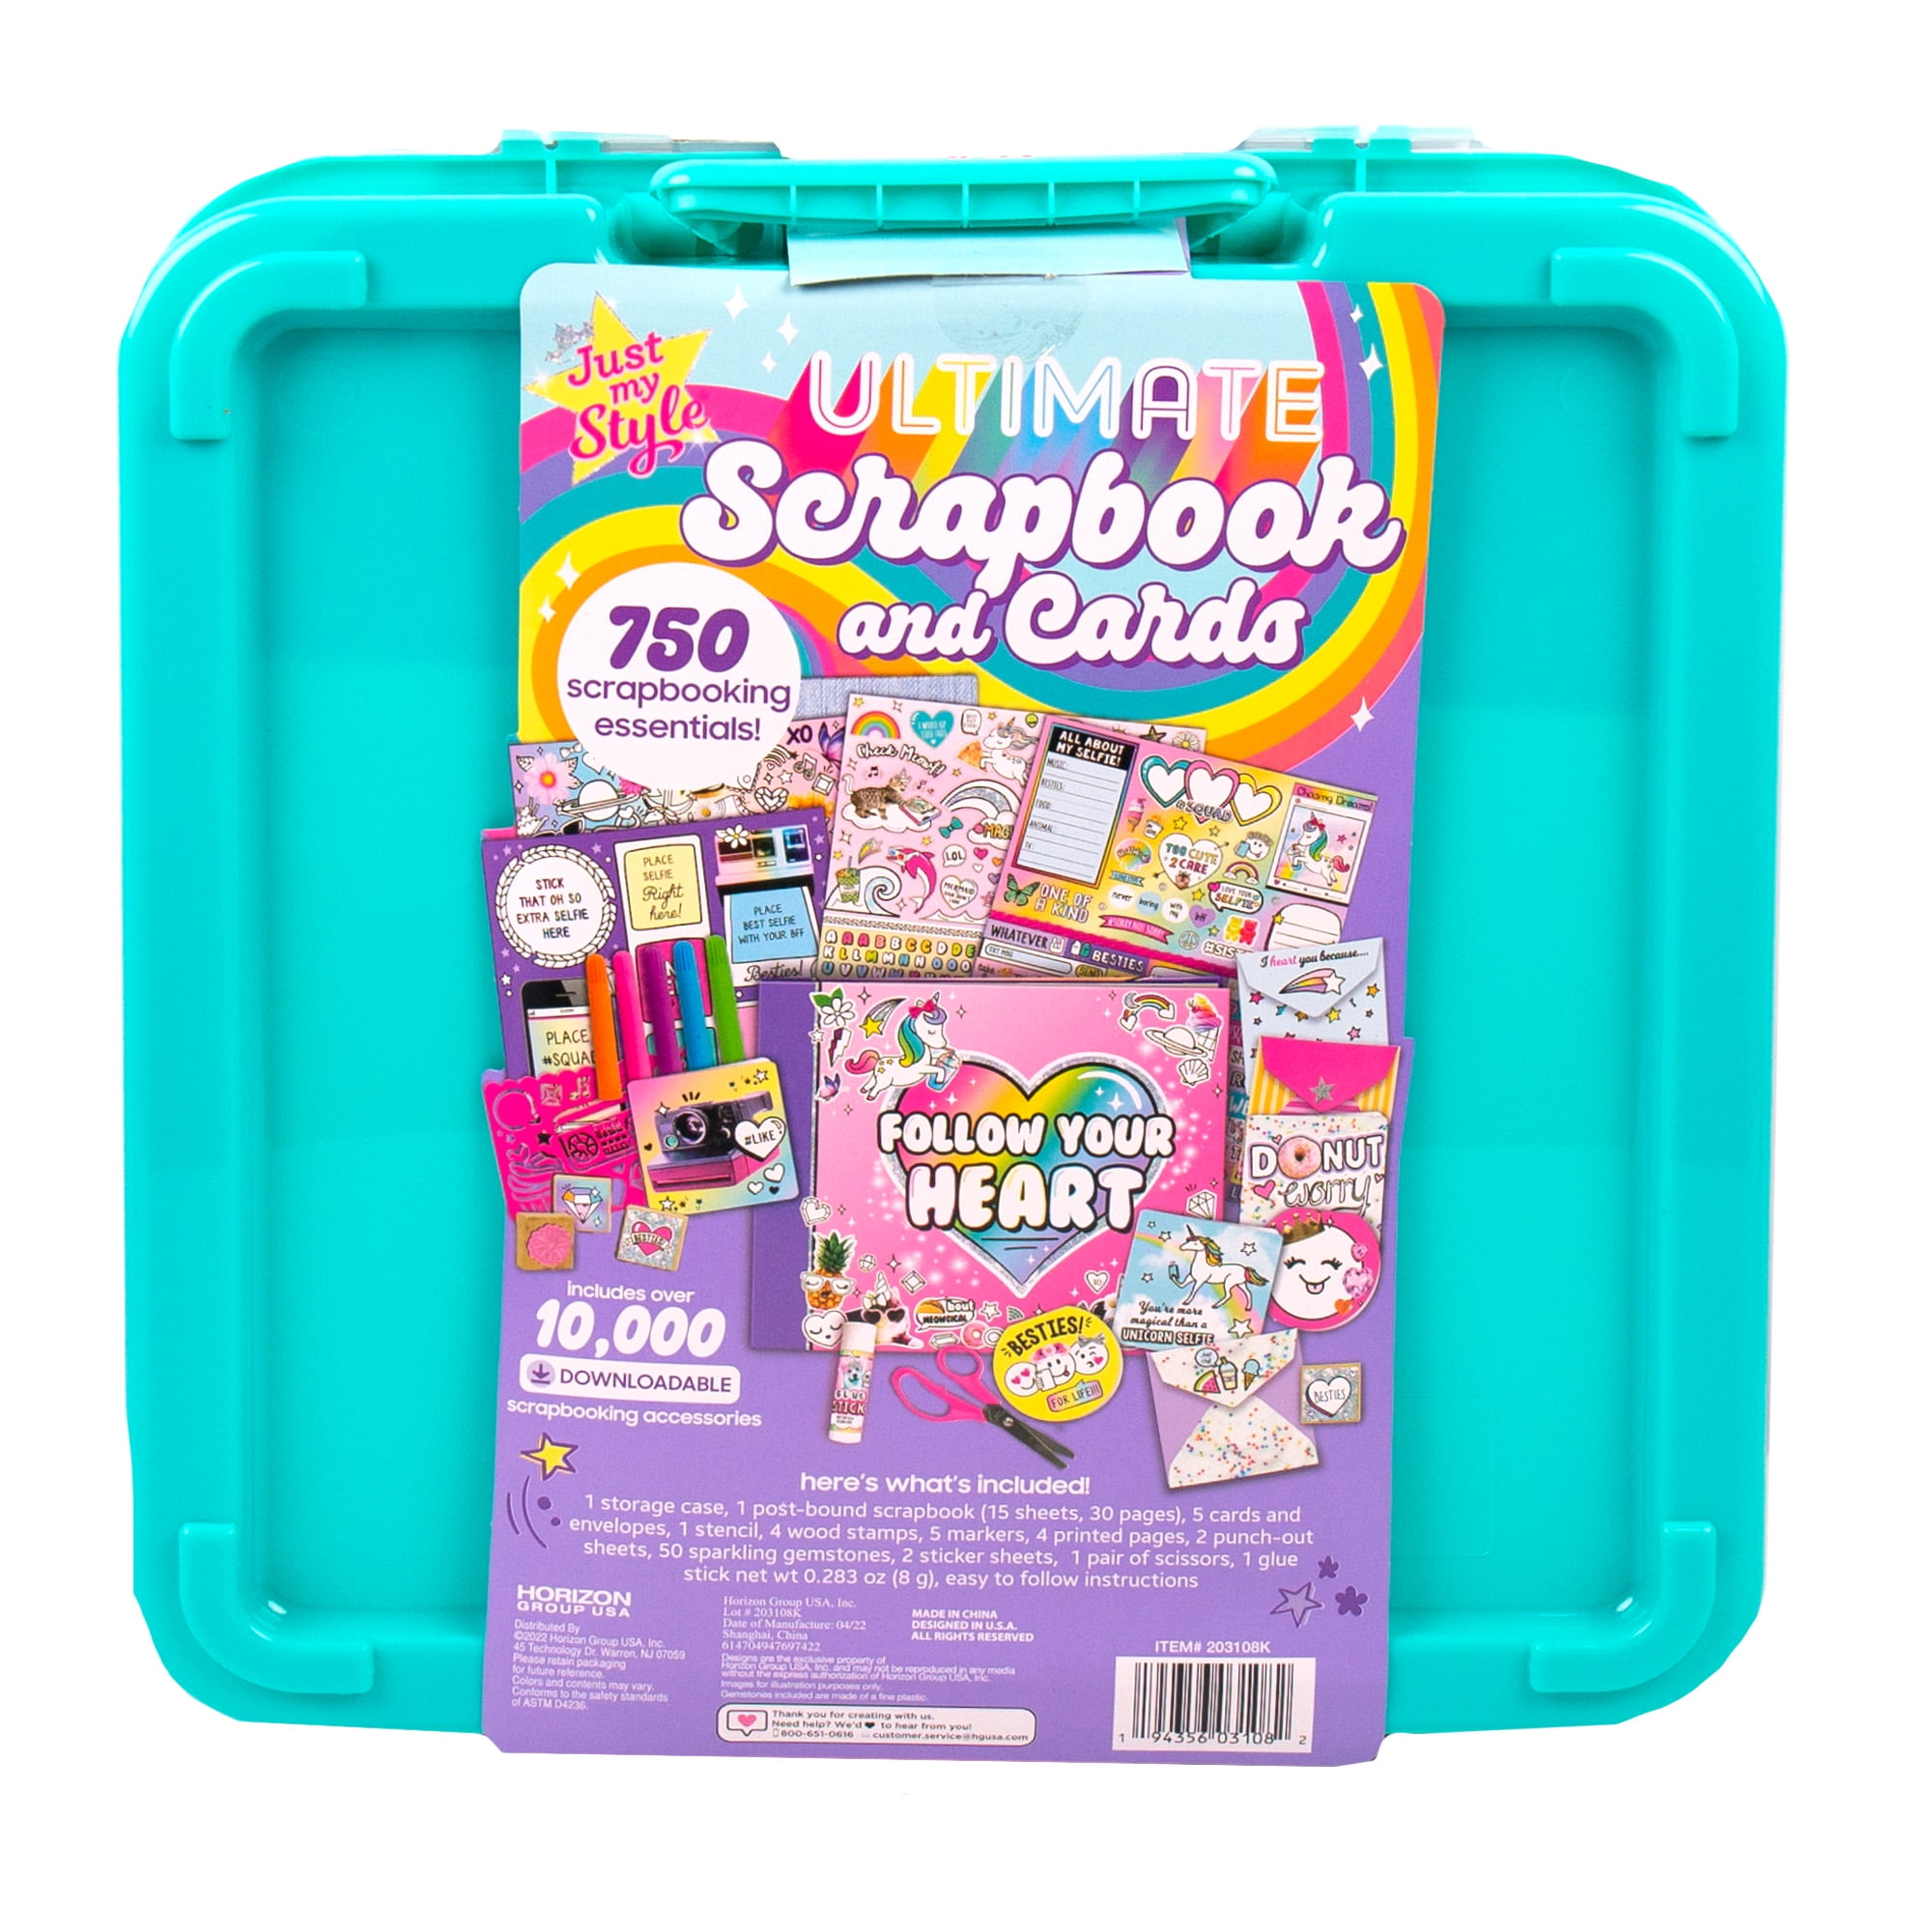 ultimate scrapbook kit with 100+ stationary essentials, Five Below